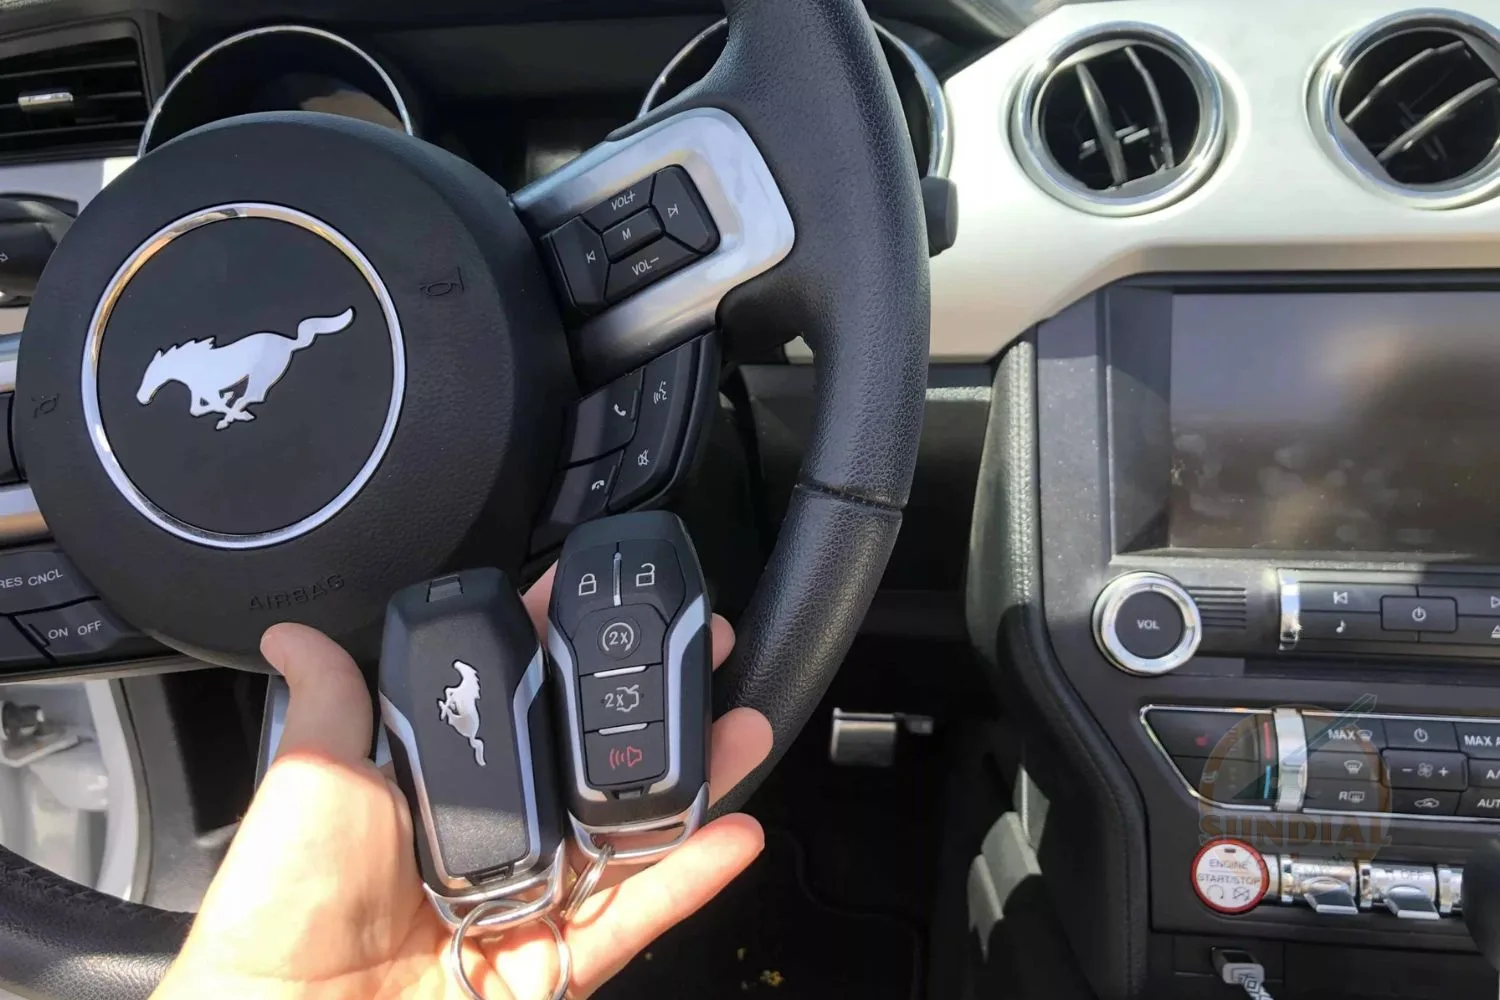 A pair of Ford Mustang key fobs held in front of the steering wheel with the Mustang logo, inside the car's interior.